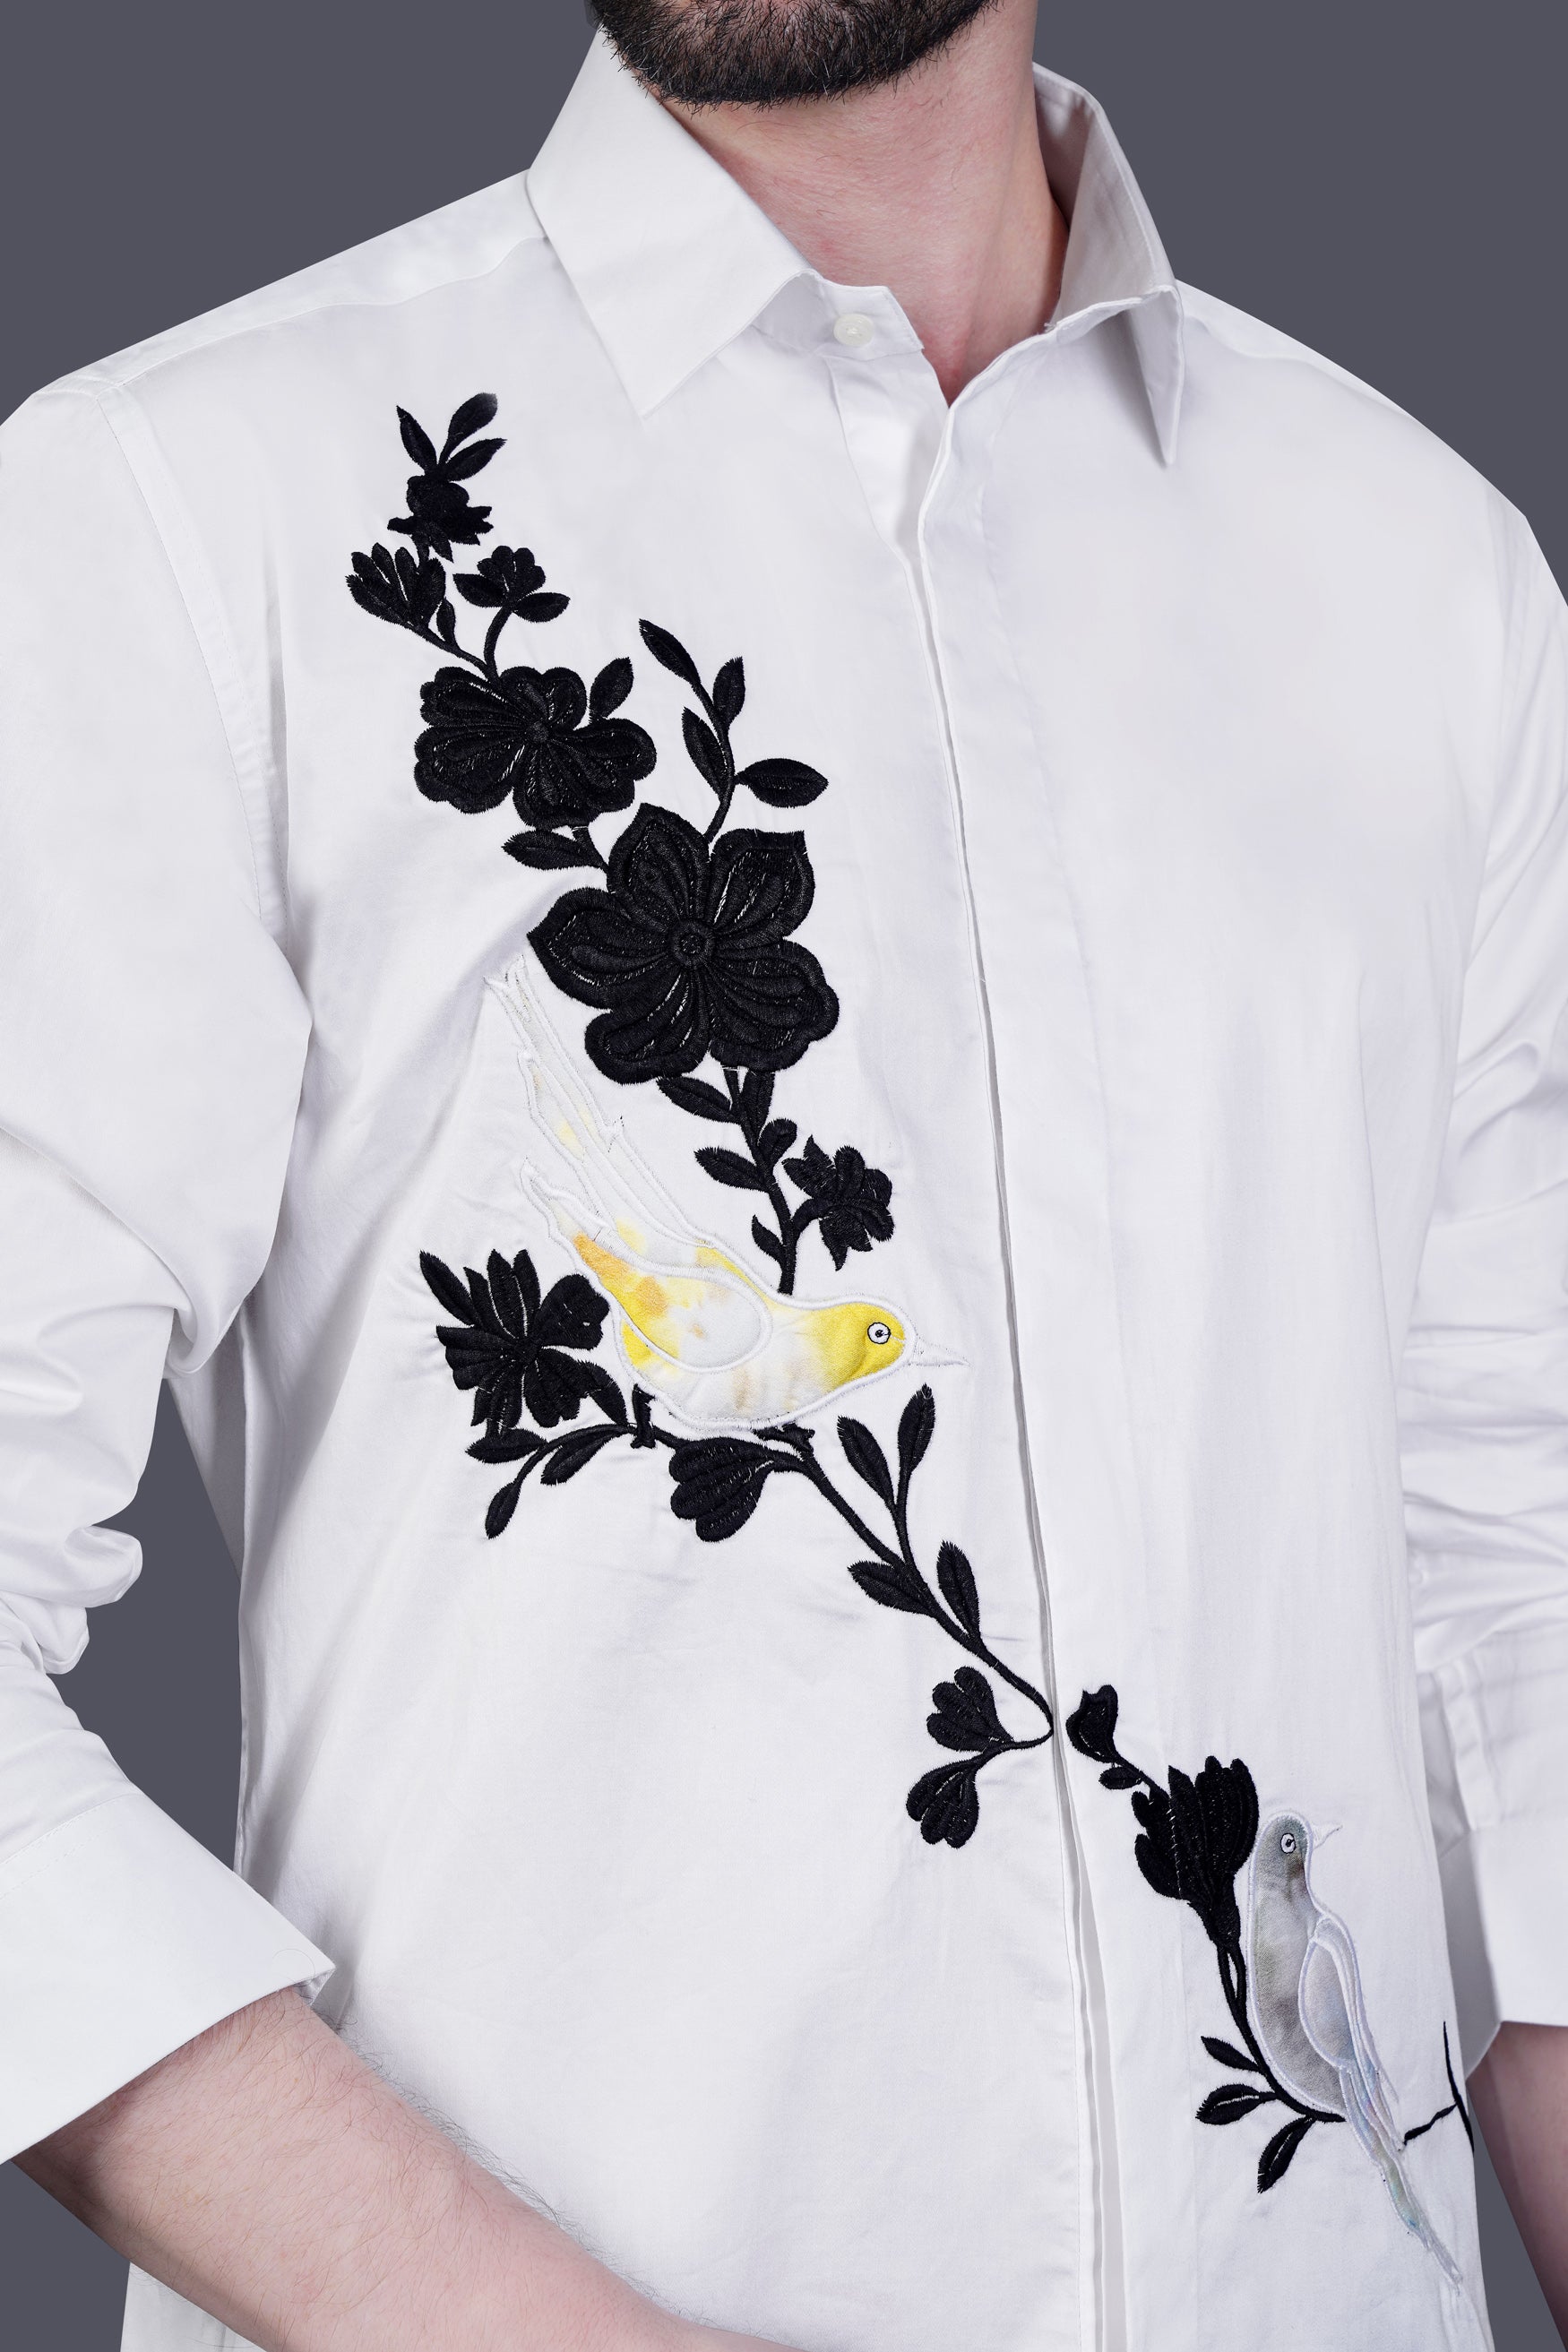 Bright White with Floral and Birds Embroidered Subtle Sheen Super Soft Premium Cotton Designer Shirt 11965-P782-NP-38, 11965-P782-NP-H-38, 11965-P782-NP-39, 11965-P782-NP-H-39, 11965-P782-NP-40, 11965-P782-NP-H-40, 11965-P782-NP-42, 11965-P782-NP-H-42, 11965-P782-NP-44, 11965-P782-NP-H-44, 11965-P782-NP-46, 11965-P782-NP-H-46, 11965-P782-NP-48, 11965-P782-NP-H-48, 11965-P782-NP-50, 11965-P782-NP-H-50, 11965-P782-NP-52, 11965-P782-NP-H-52